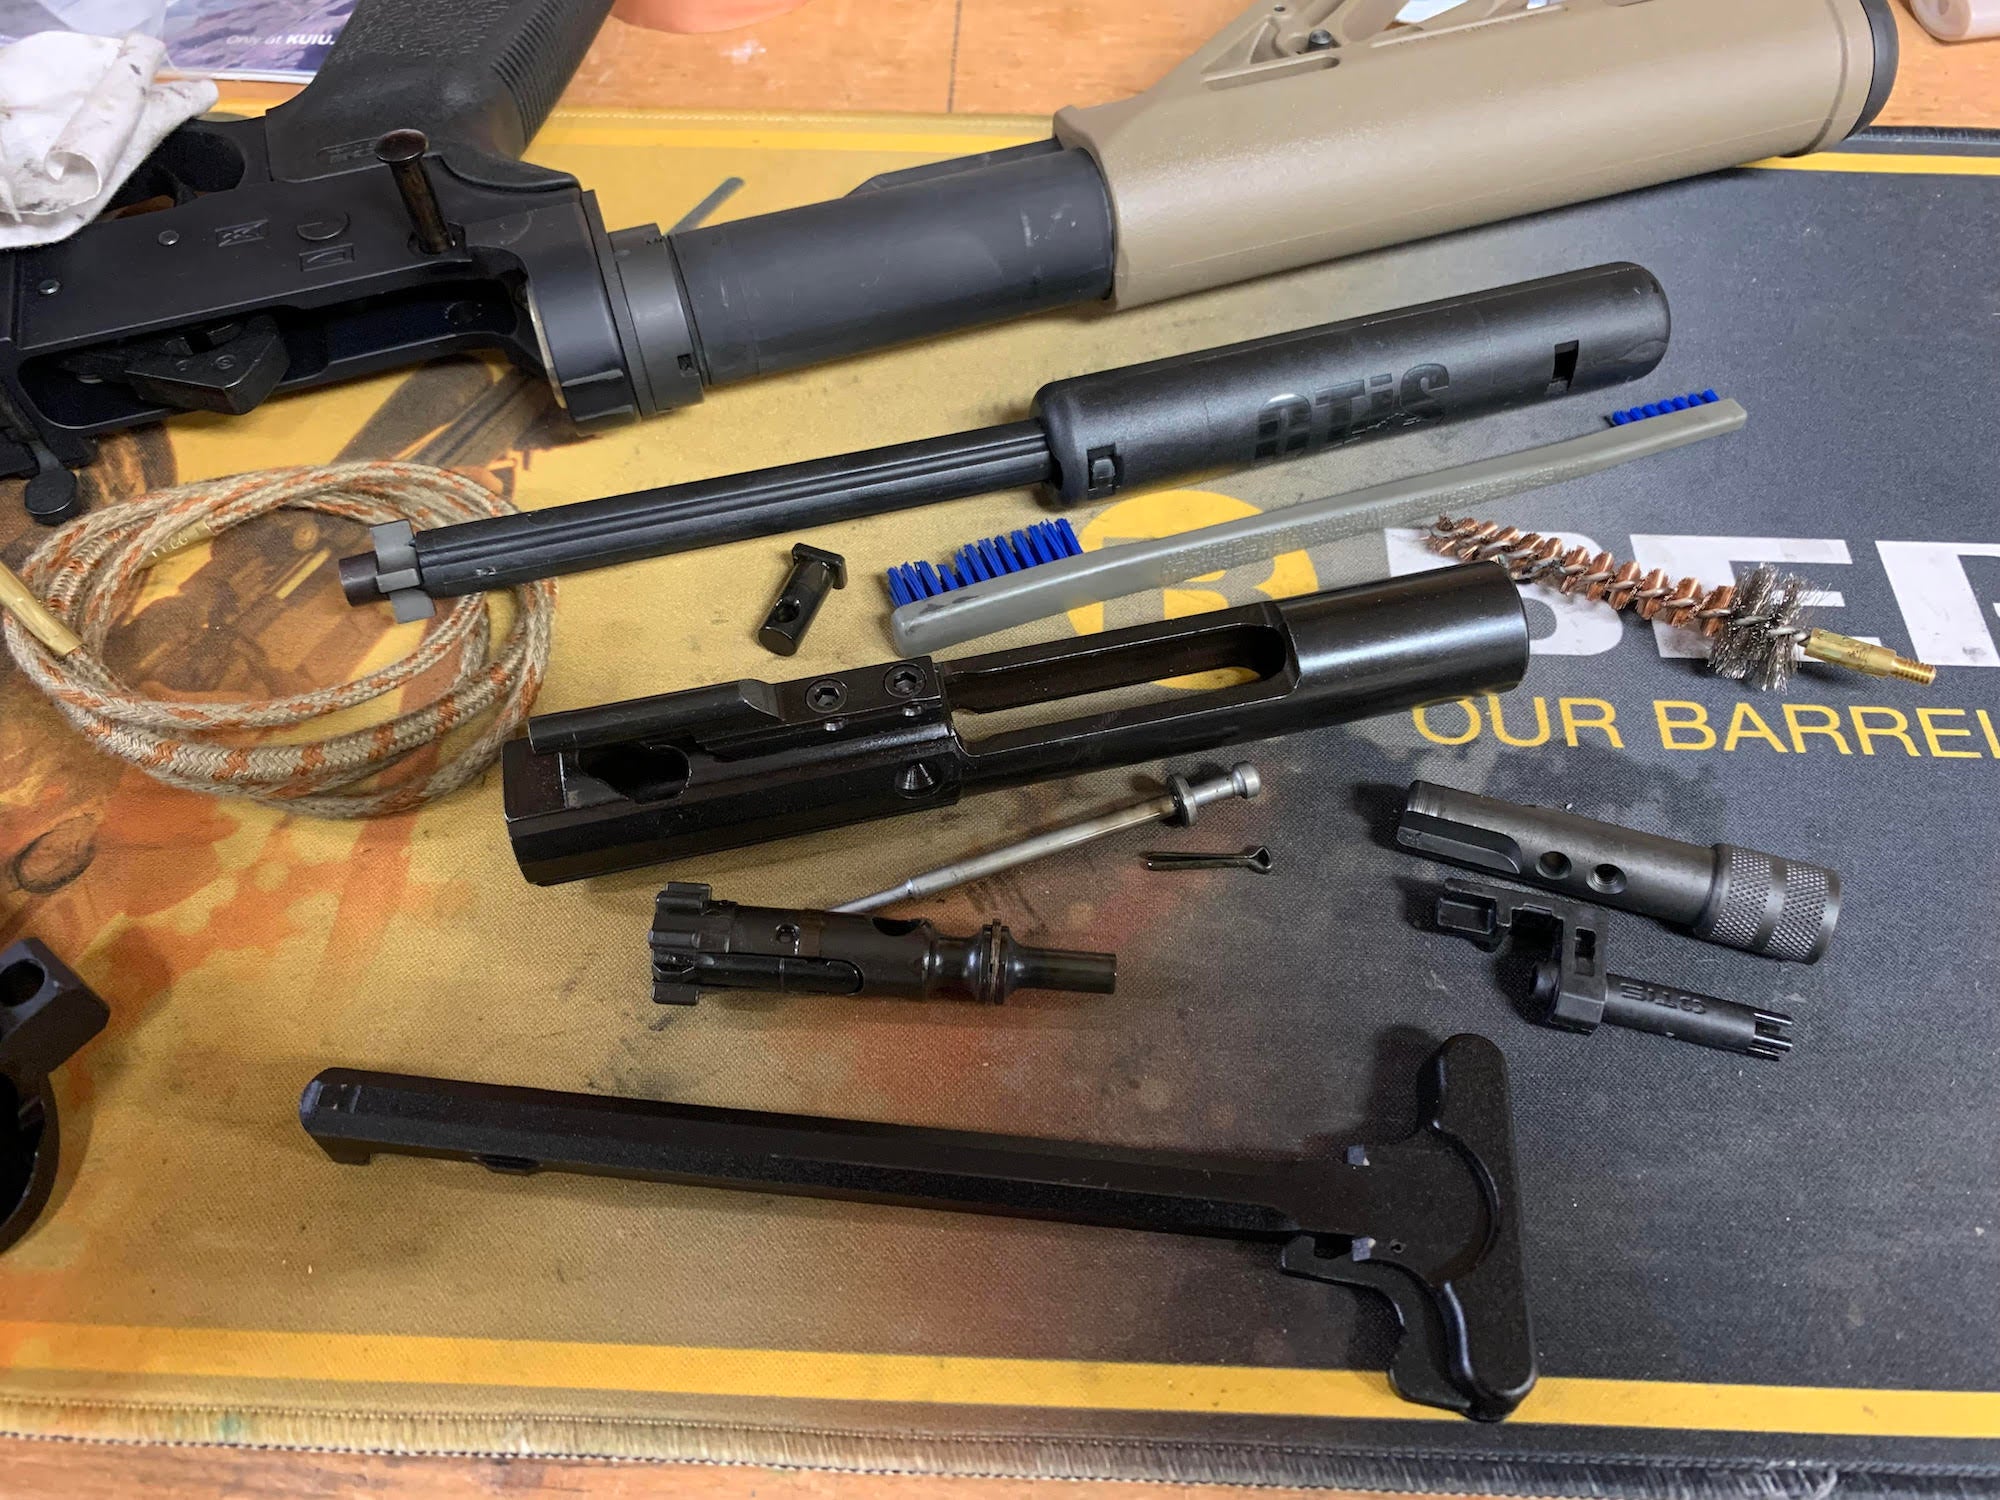 A set of gun cleaning tools